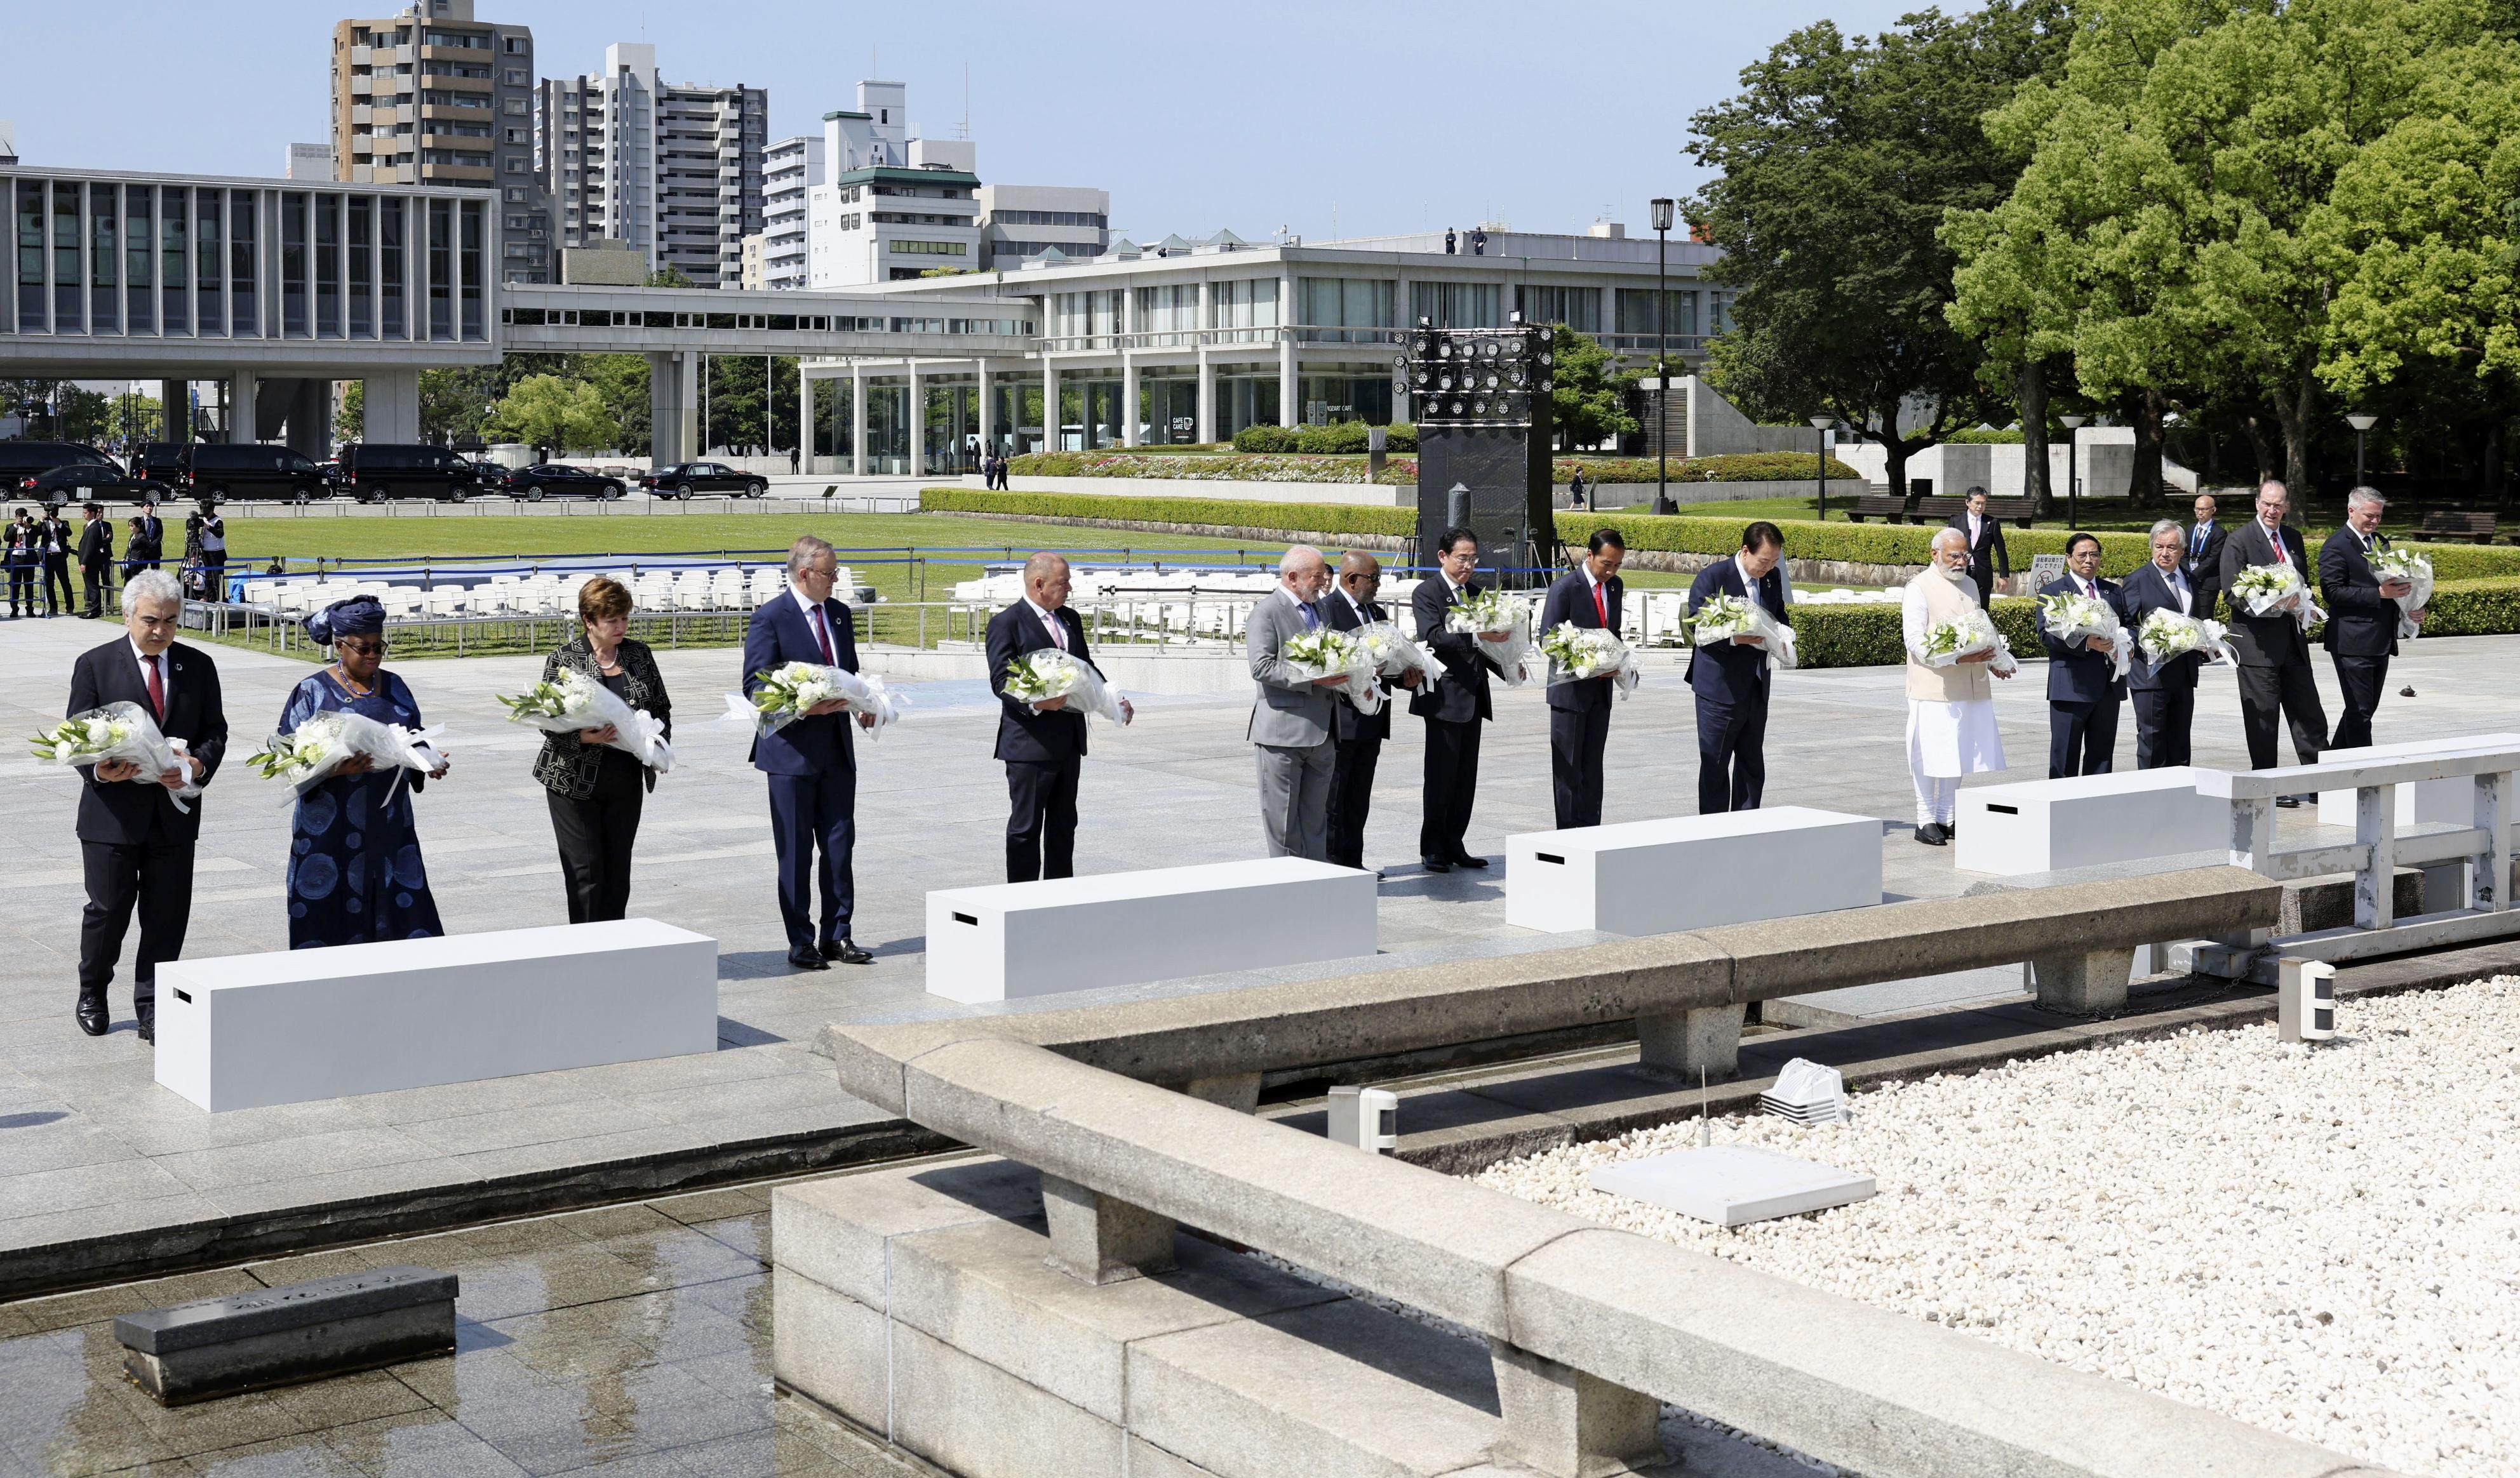 Leaders at the G7 summit in Hiroshima offer flowers at the cenotaph for atomic bomb victims at the Peace Memorial Park in the western Japanese city. Photo: Kyodo